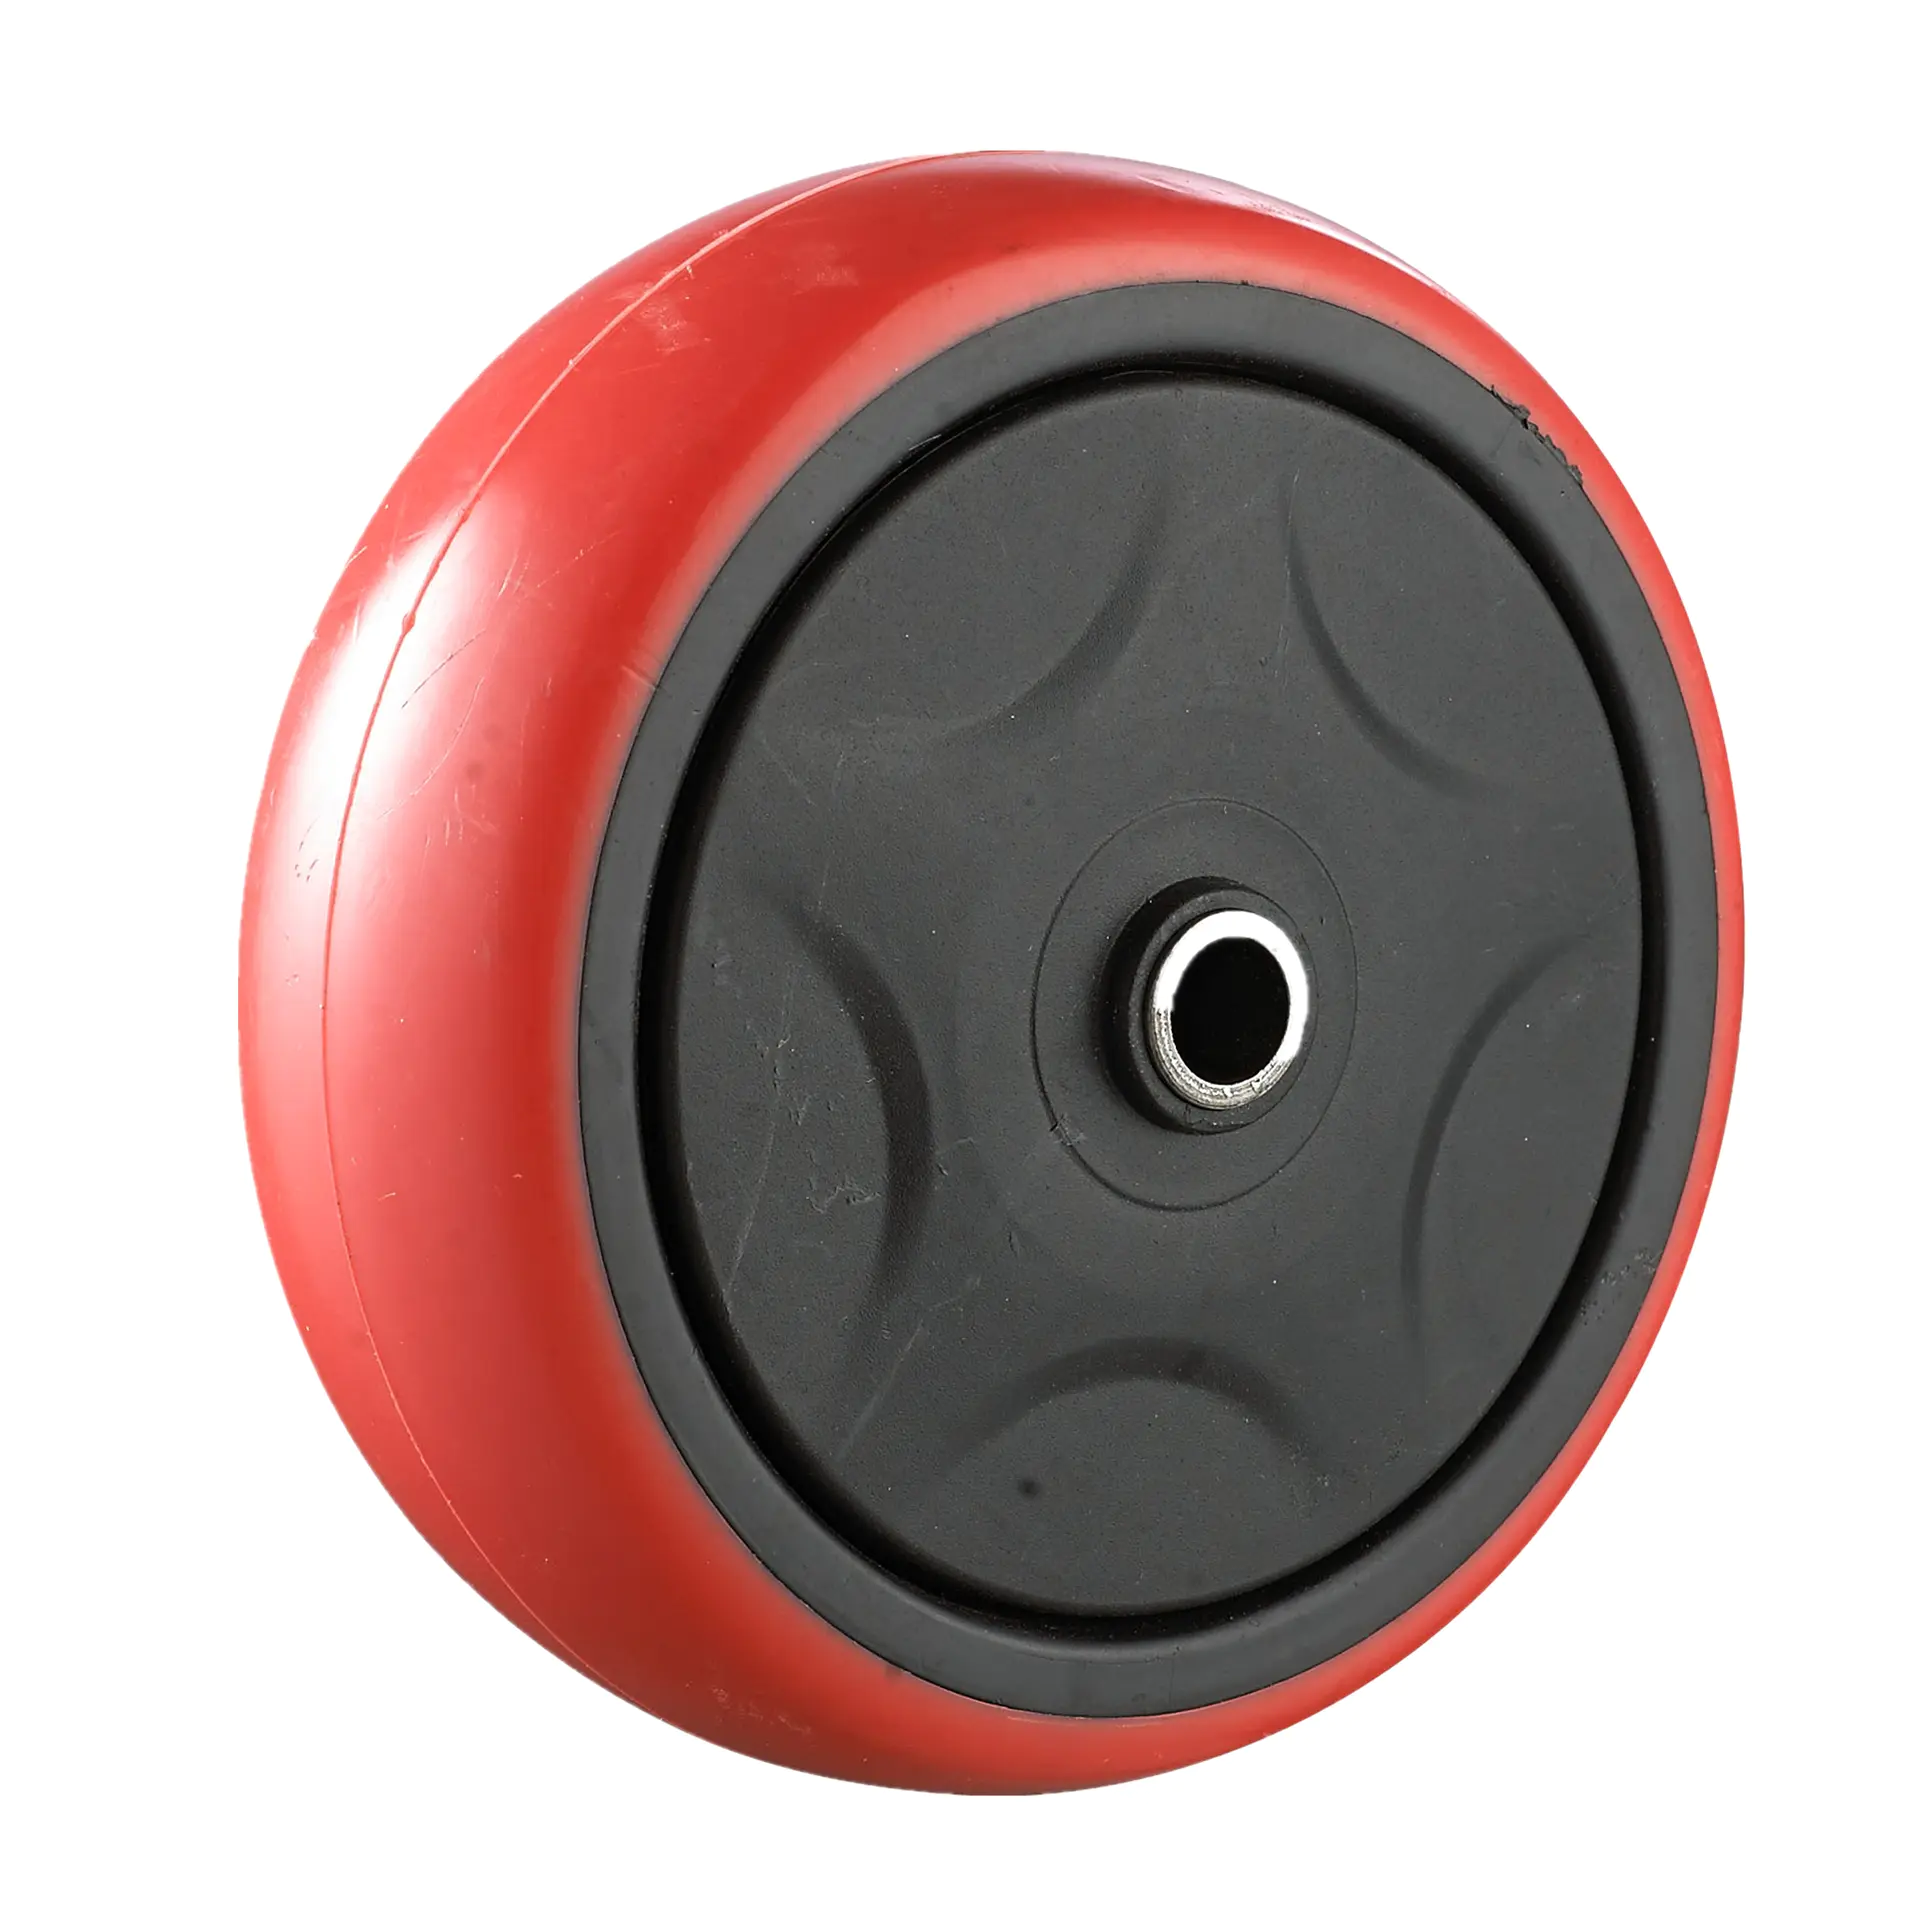 Economic Industrial European Mounting Size 100mm 4 Inch Fixed Rigid Polyurethane Red PU Caster